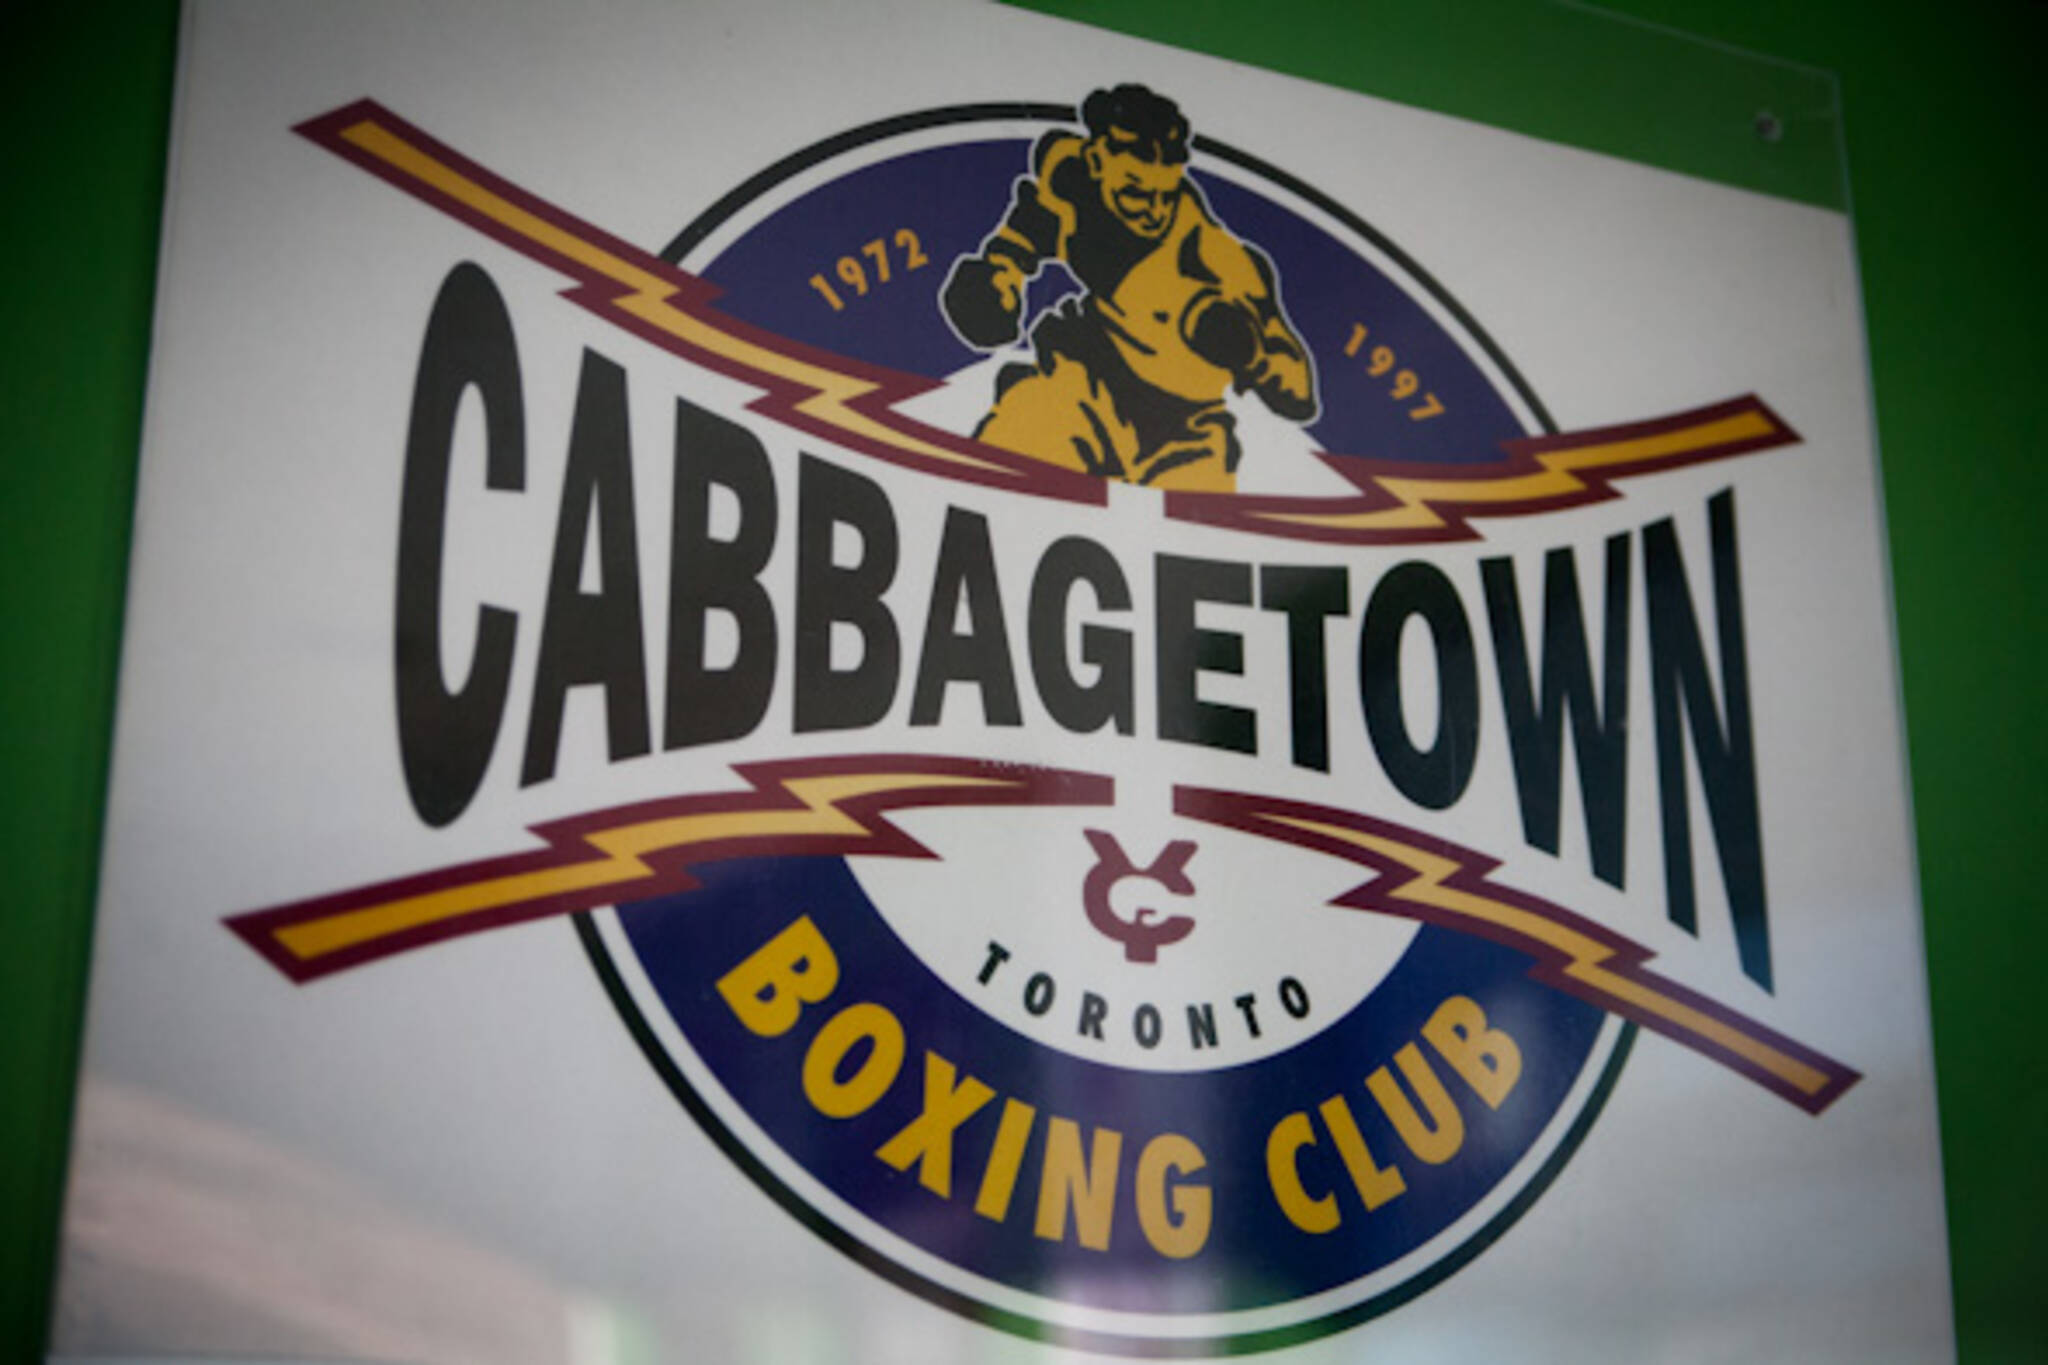 Cabbagetown Boxing Club